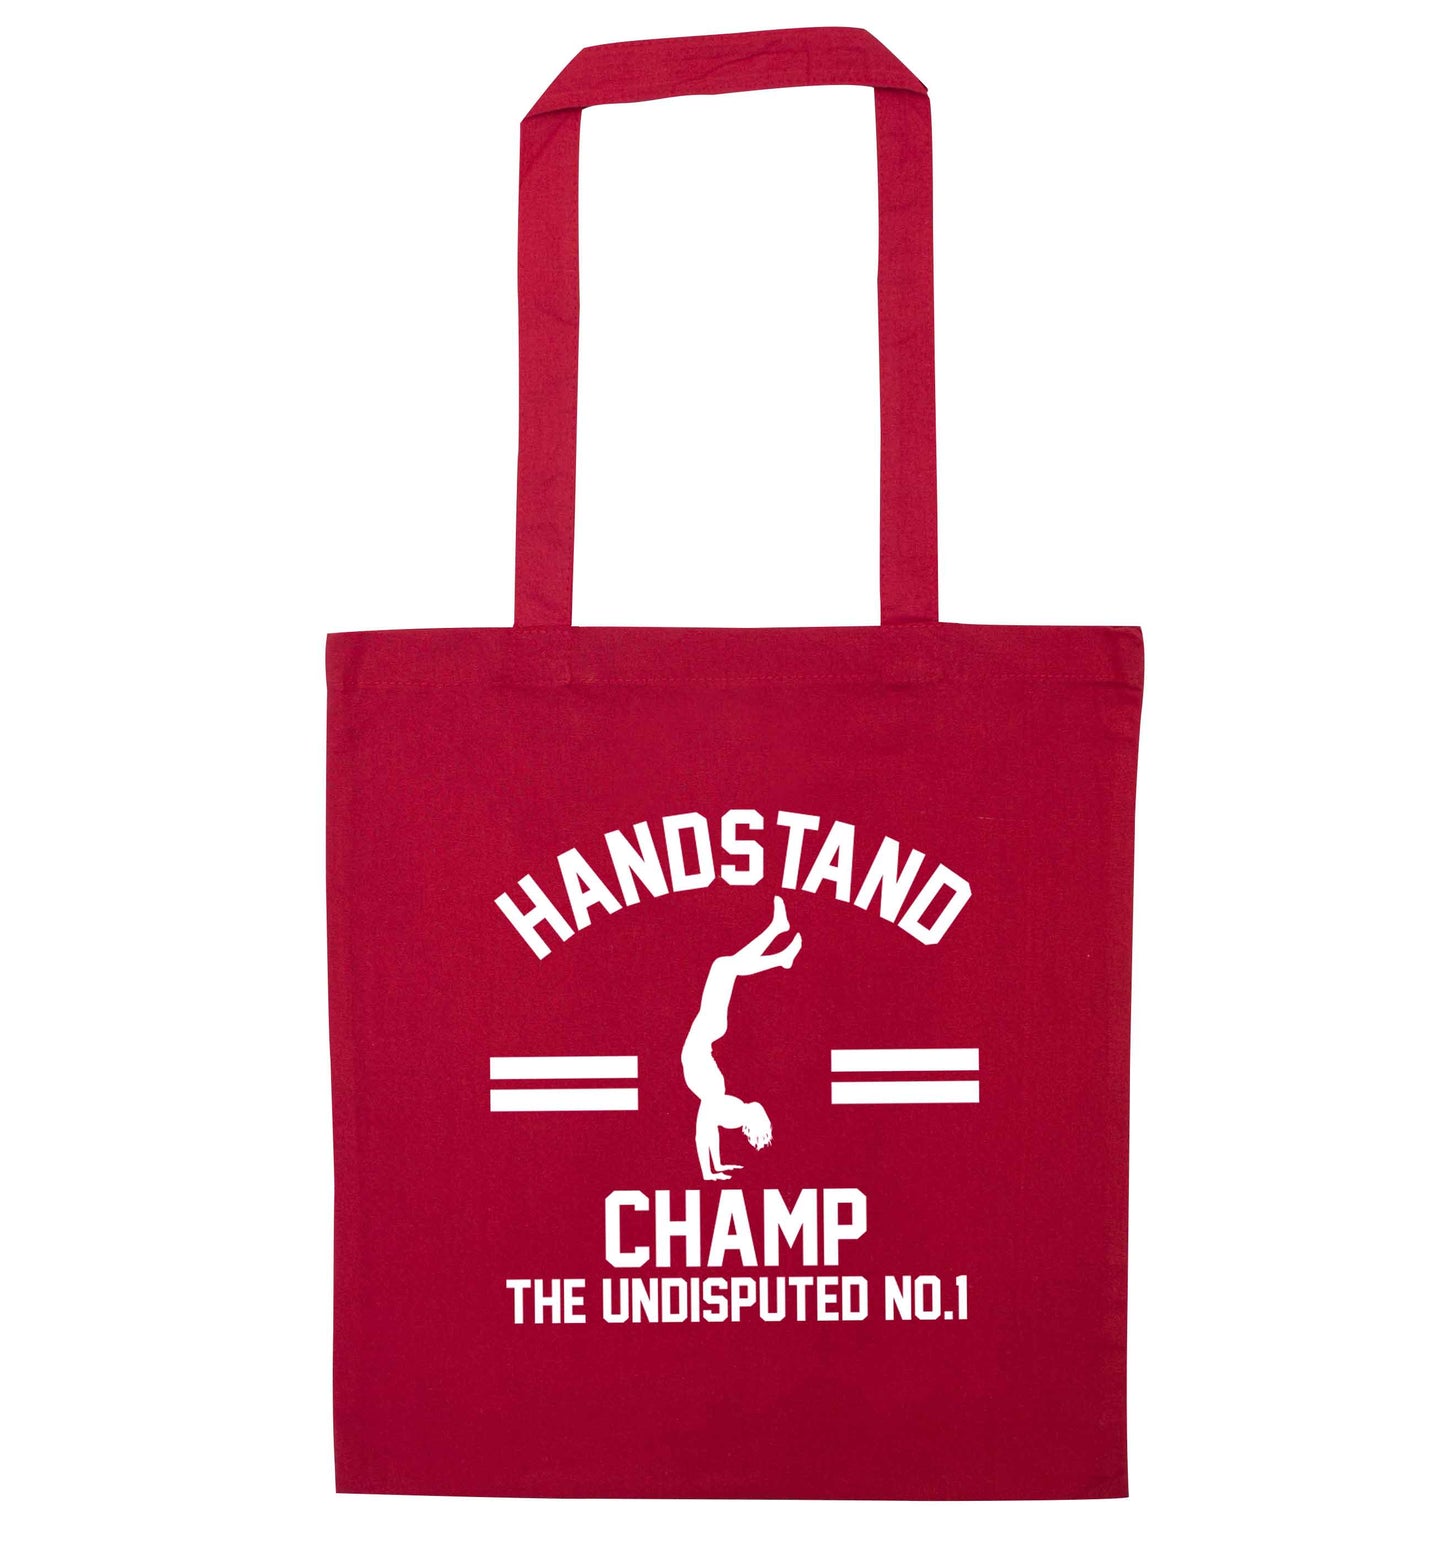 Undisputed handstand championship no.1  red tote bag